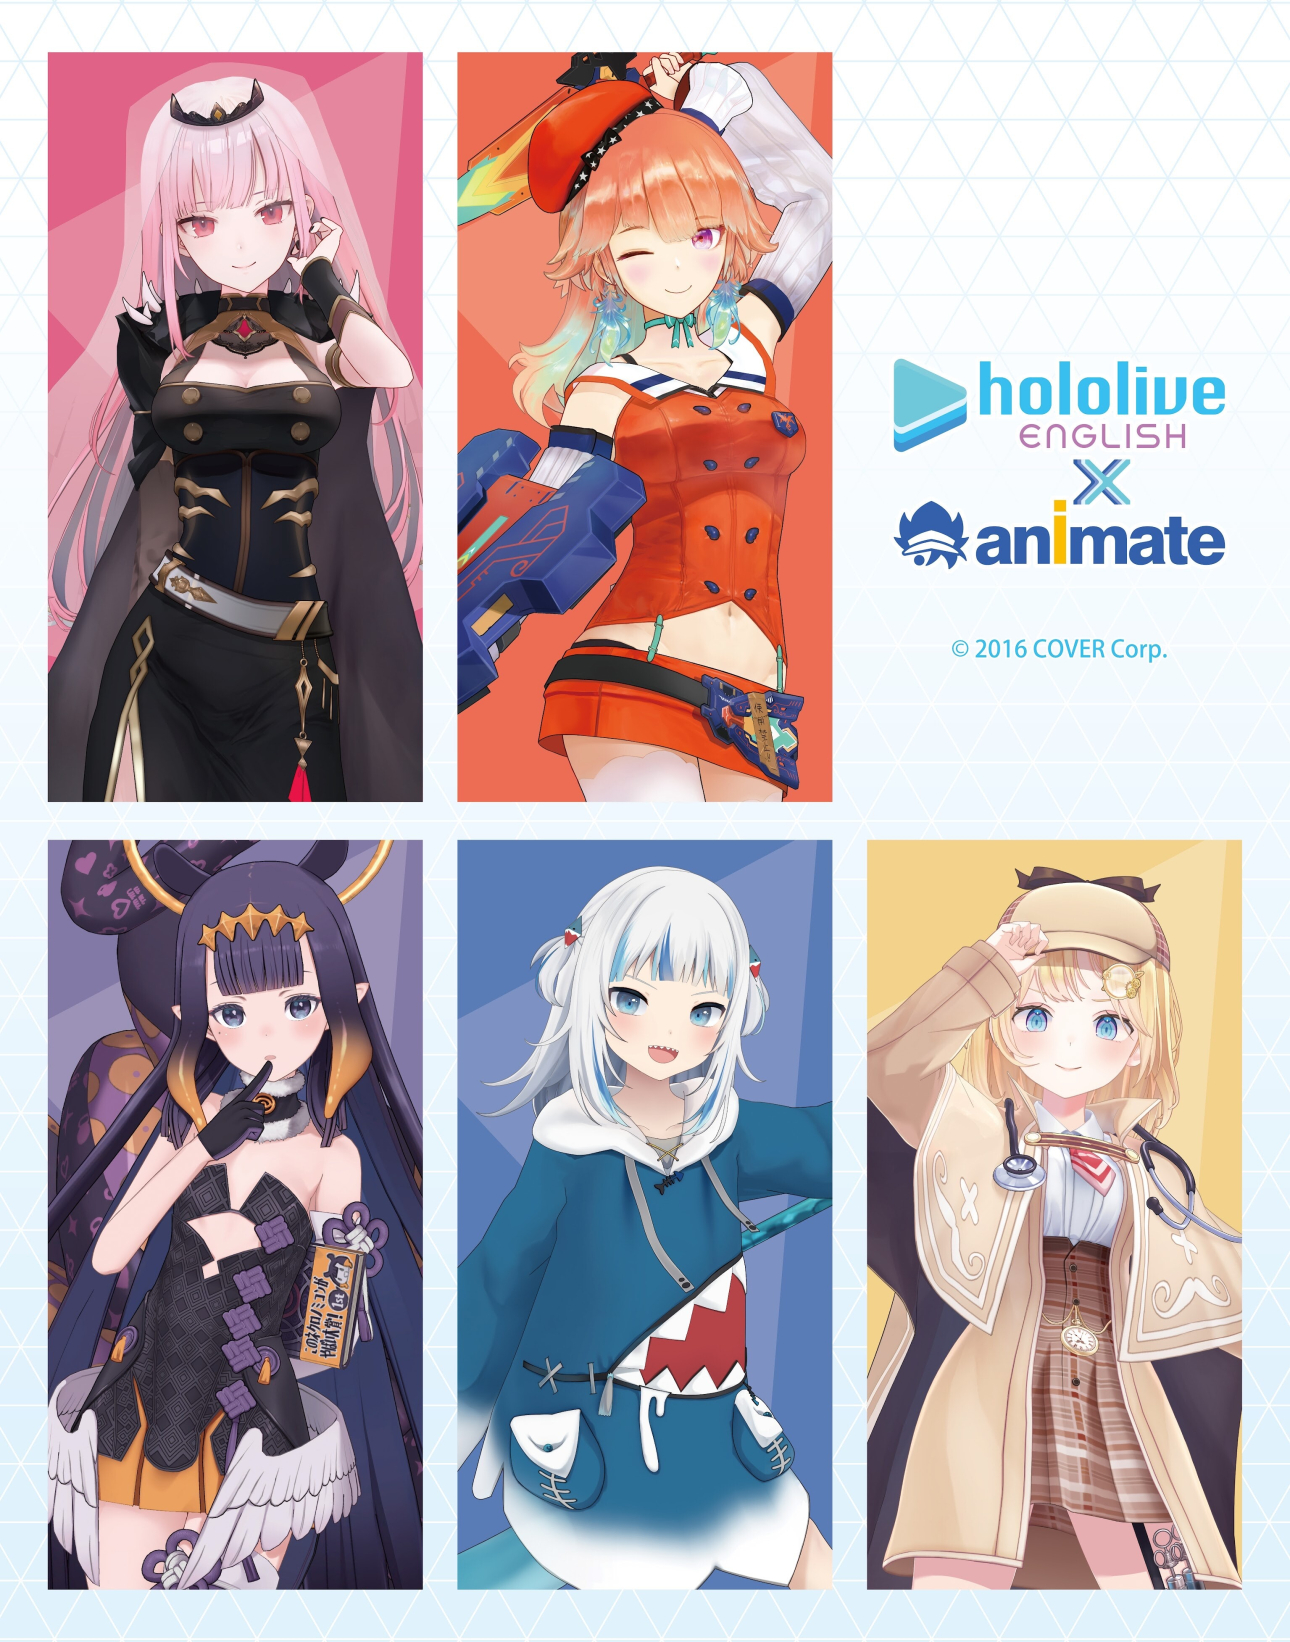 Exclusive hololive English -Myth- x animate Collaboration Merch 